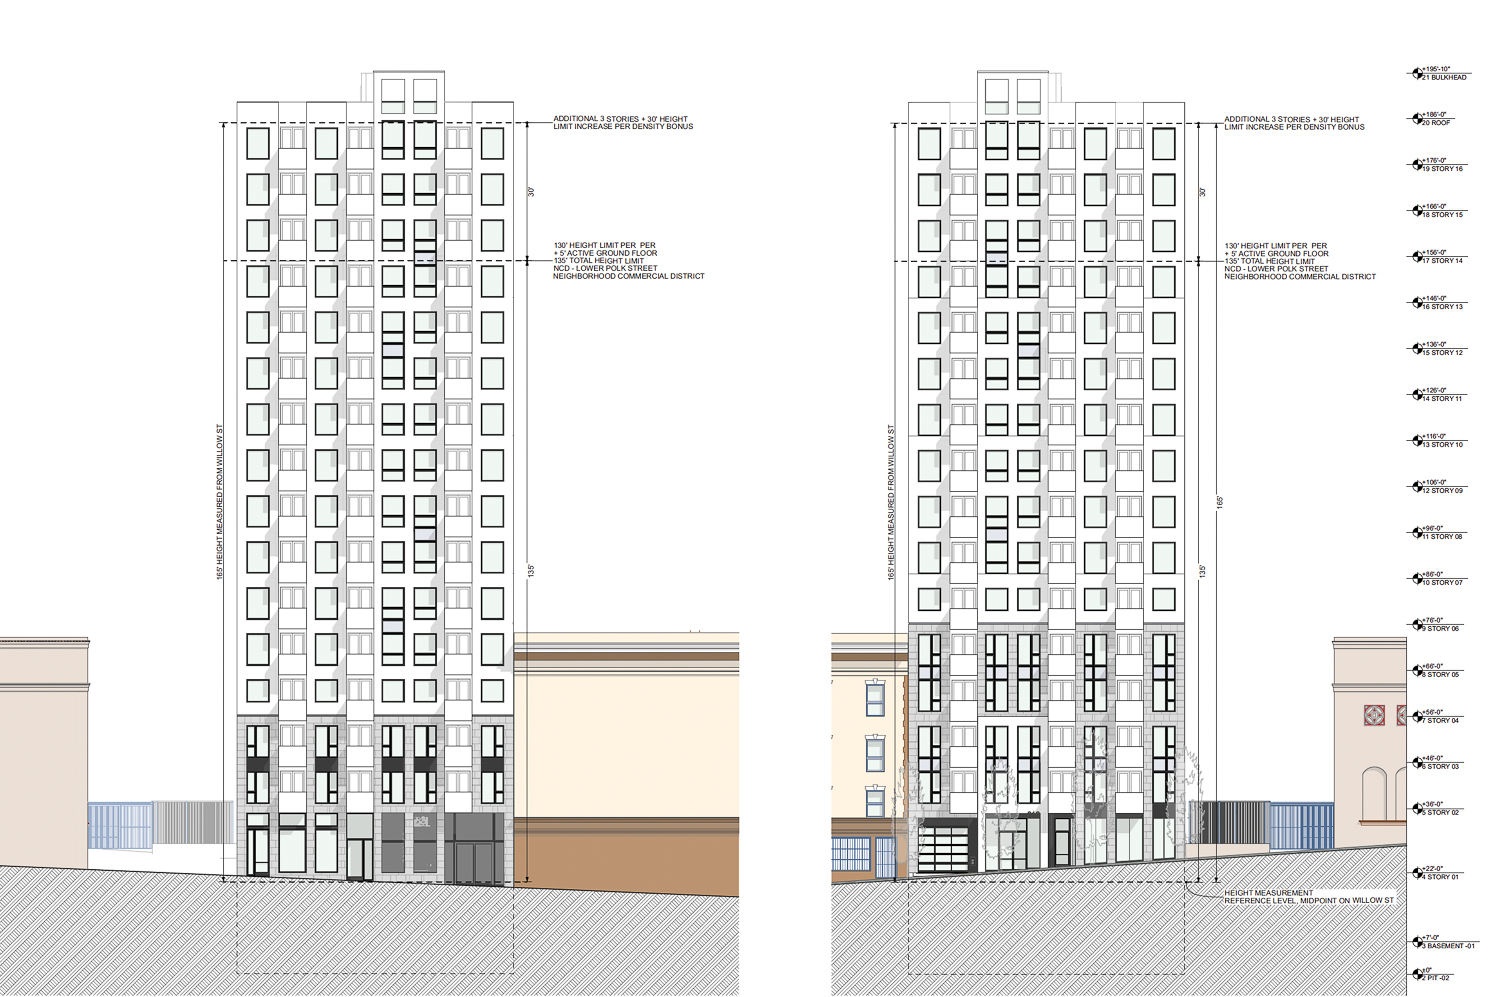 819 Ellis Street South and North elevations, illustrations by RG Architecture